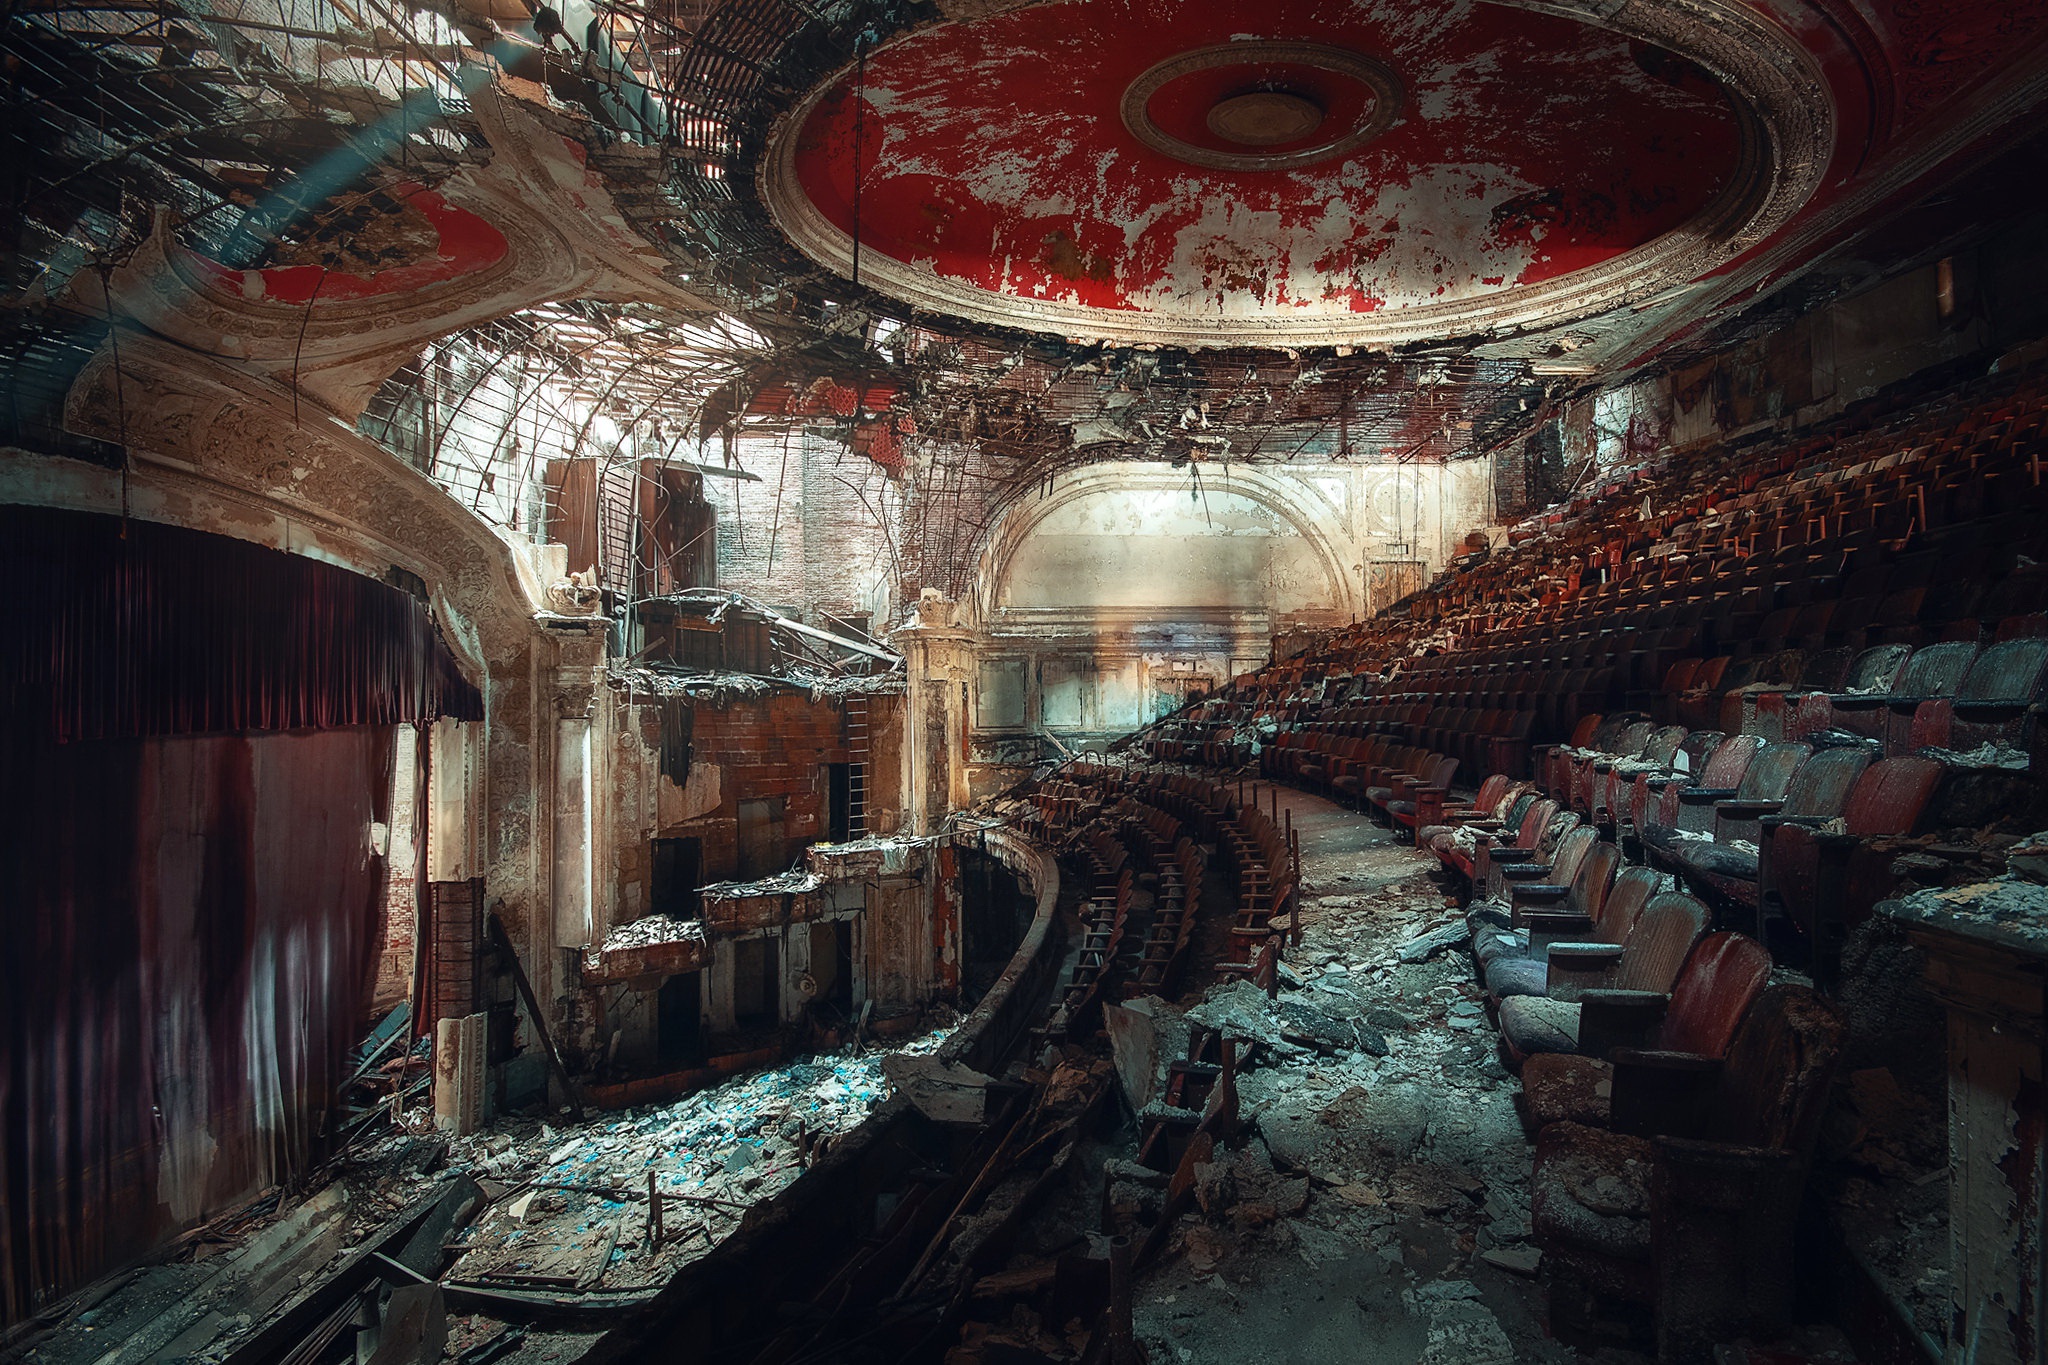 General 2048x1365 ruins old building theaters abandoned